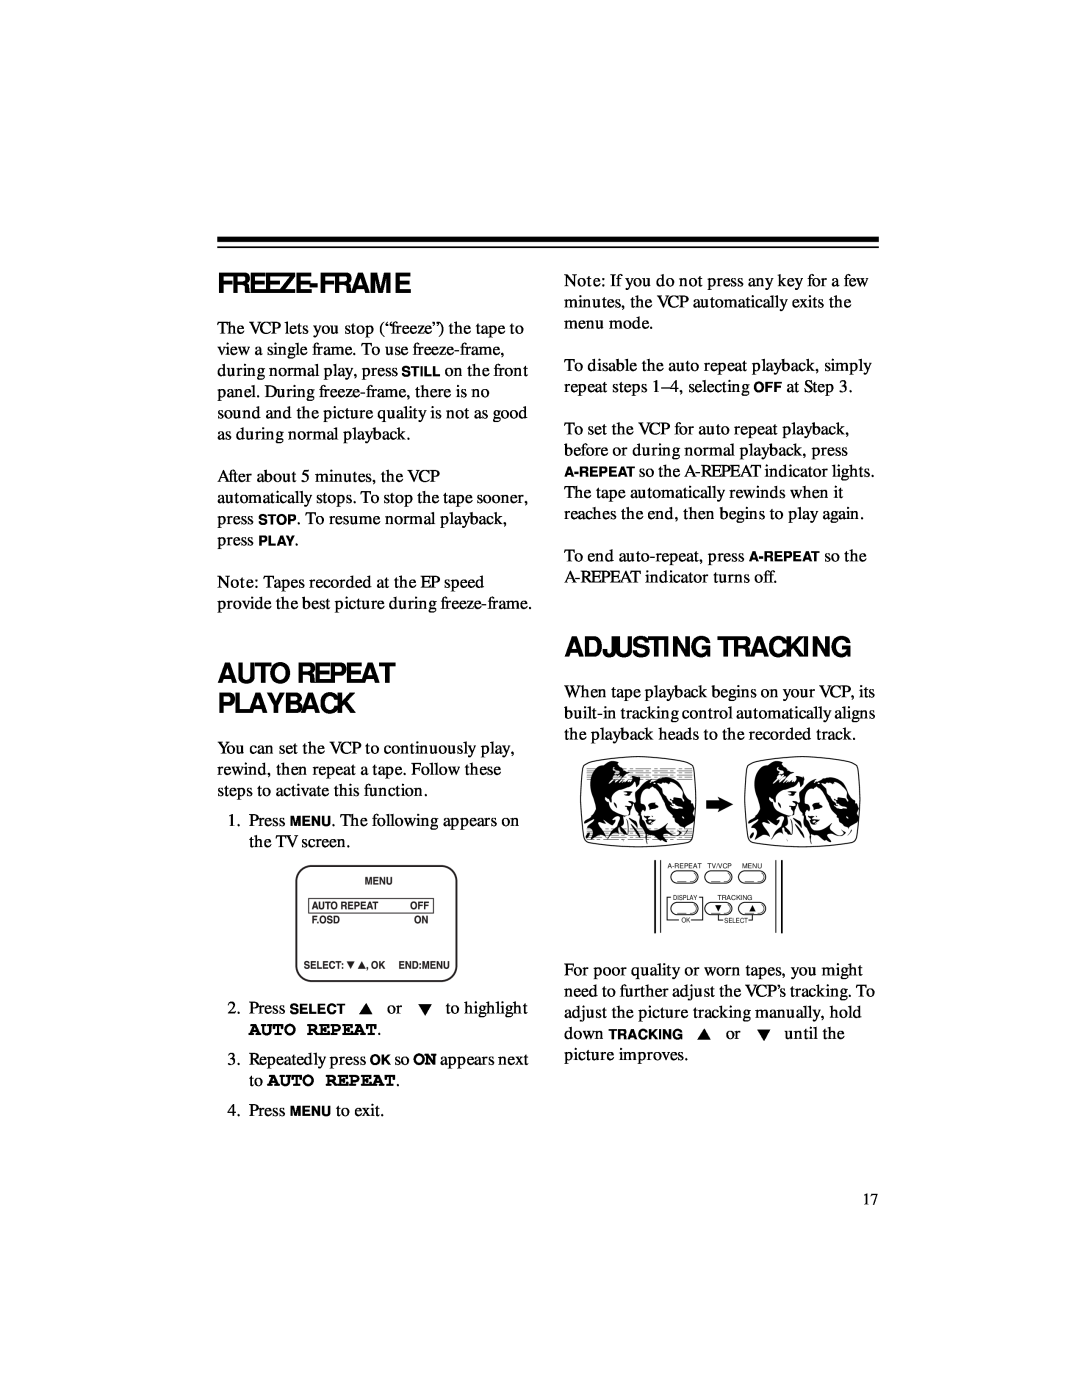 RCA 40, 50 owner manual Freeze-Frame, Auto Repeat Playback, Adjusting Tracking 